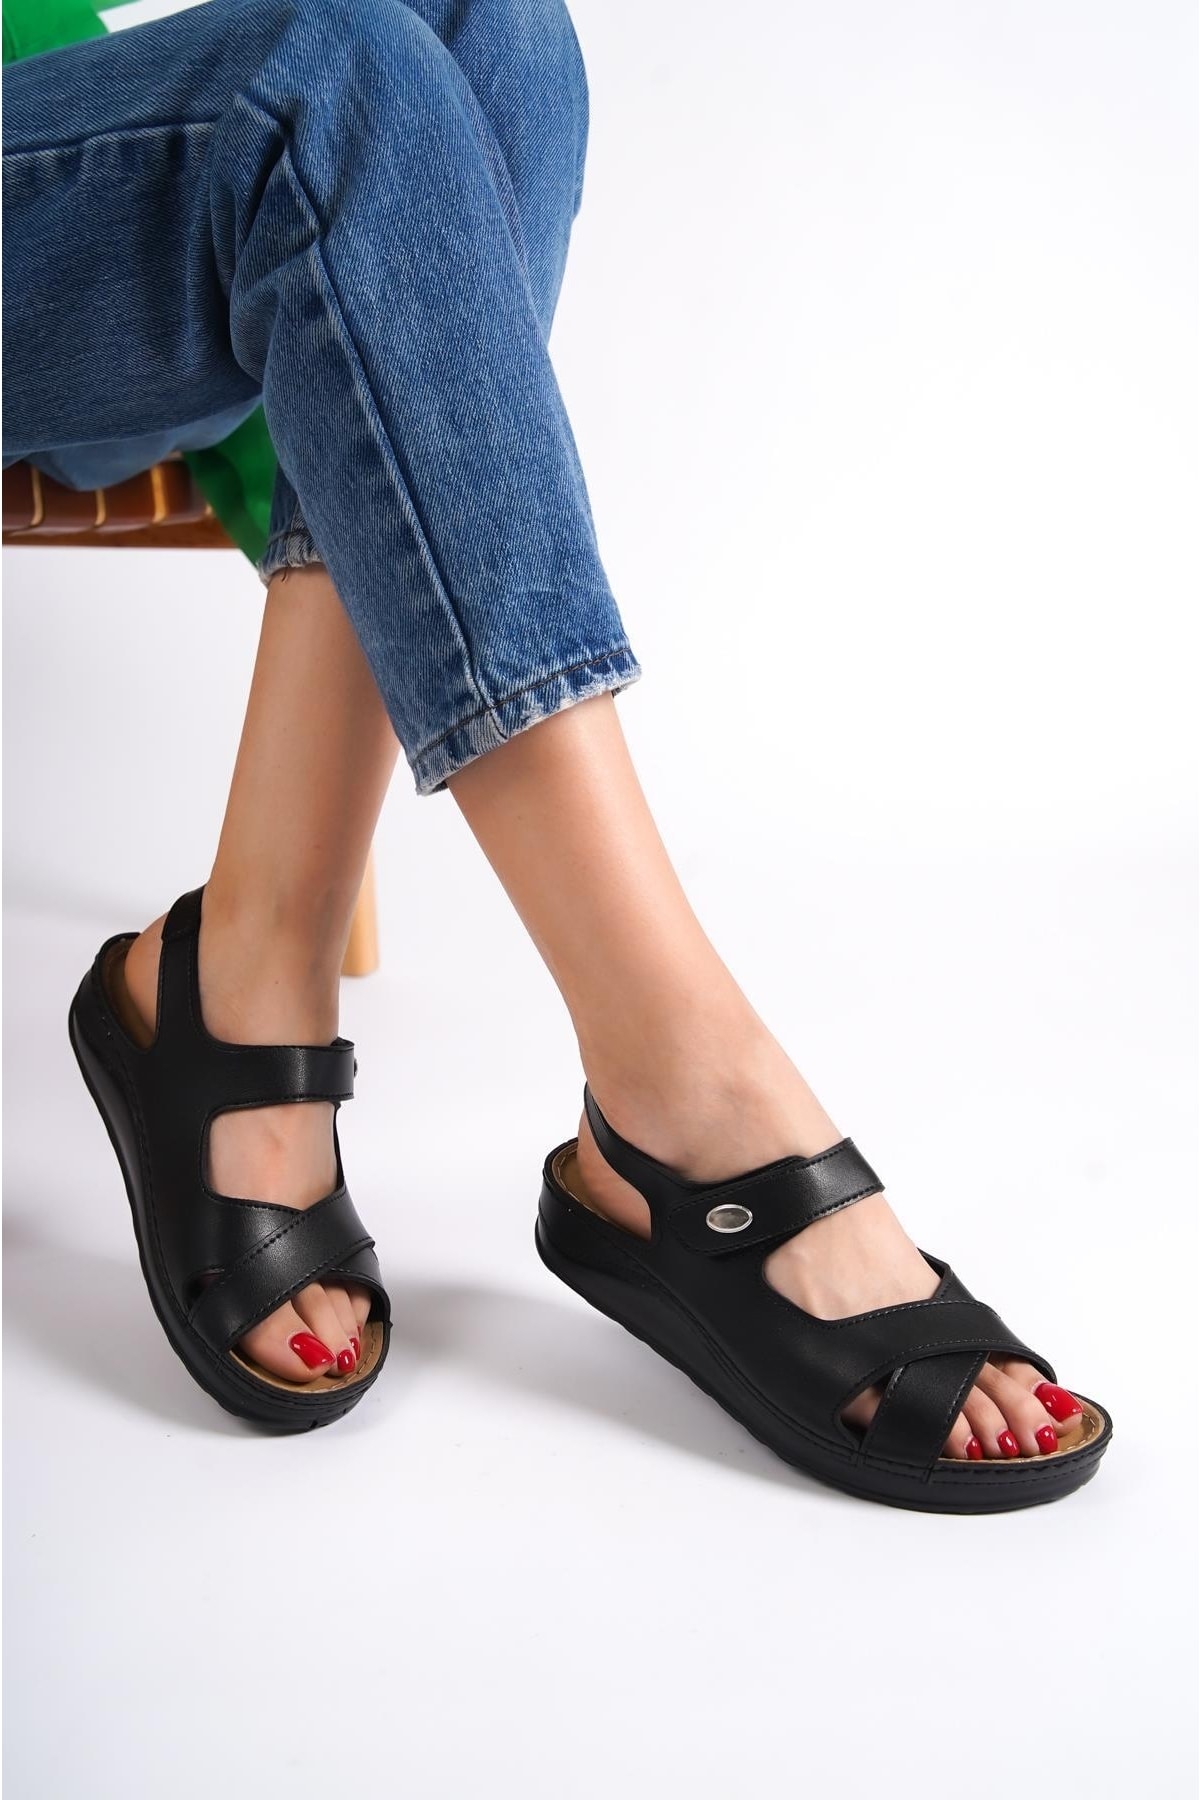 Capone Outfitters Anatomical Soft Comfortable Sole Wedge Heel Mother Sandals